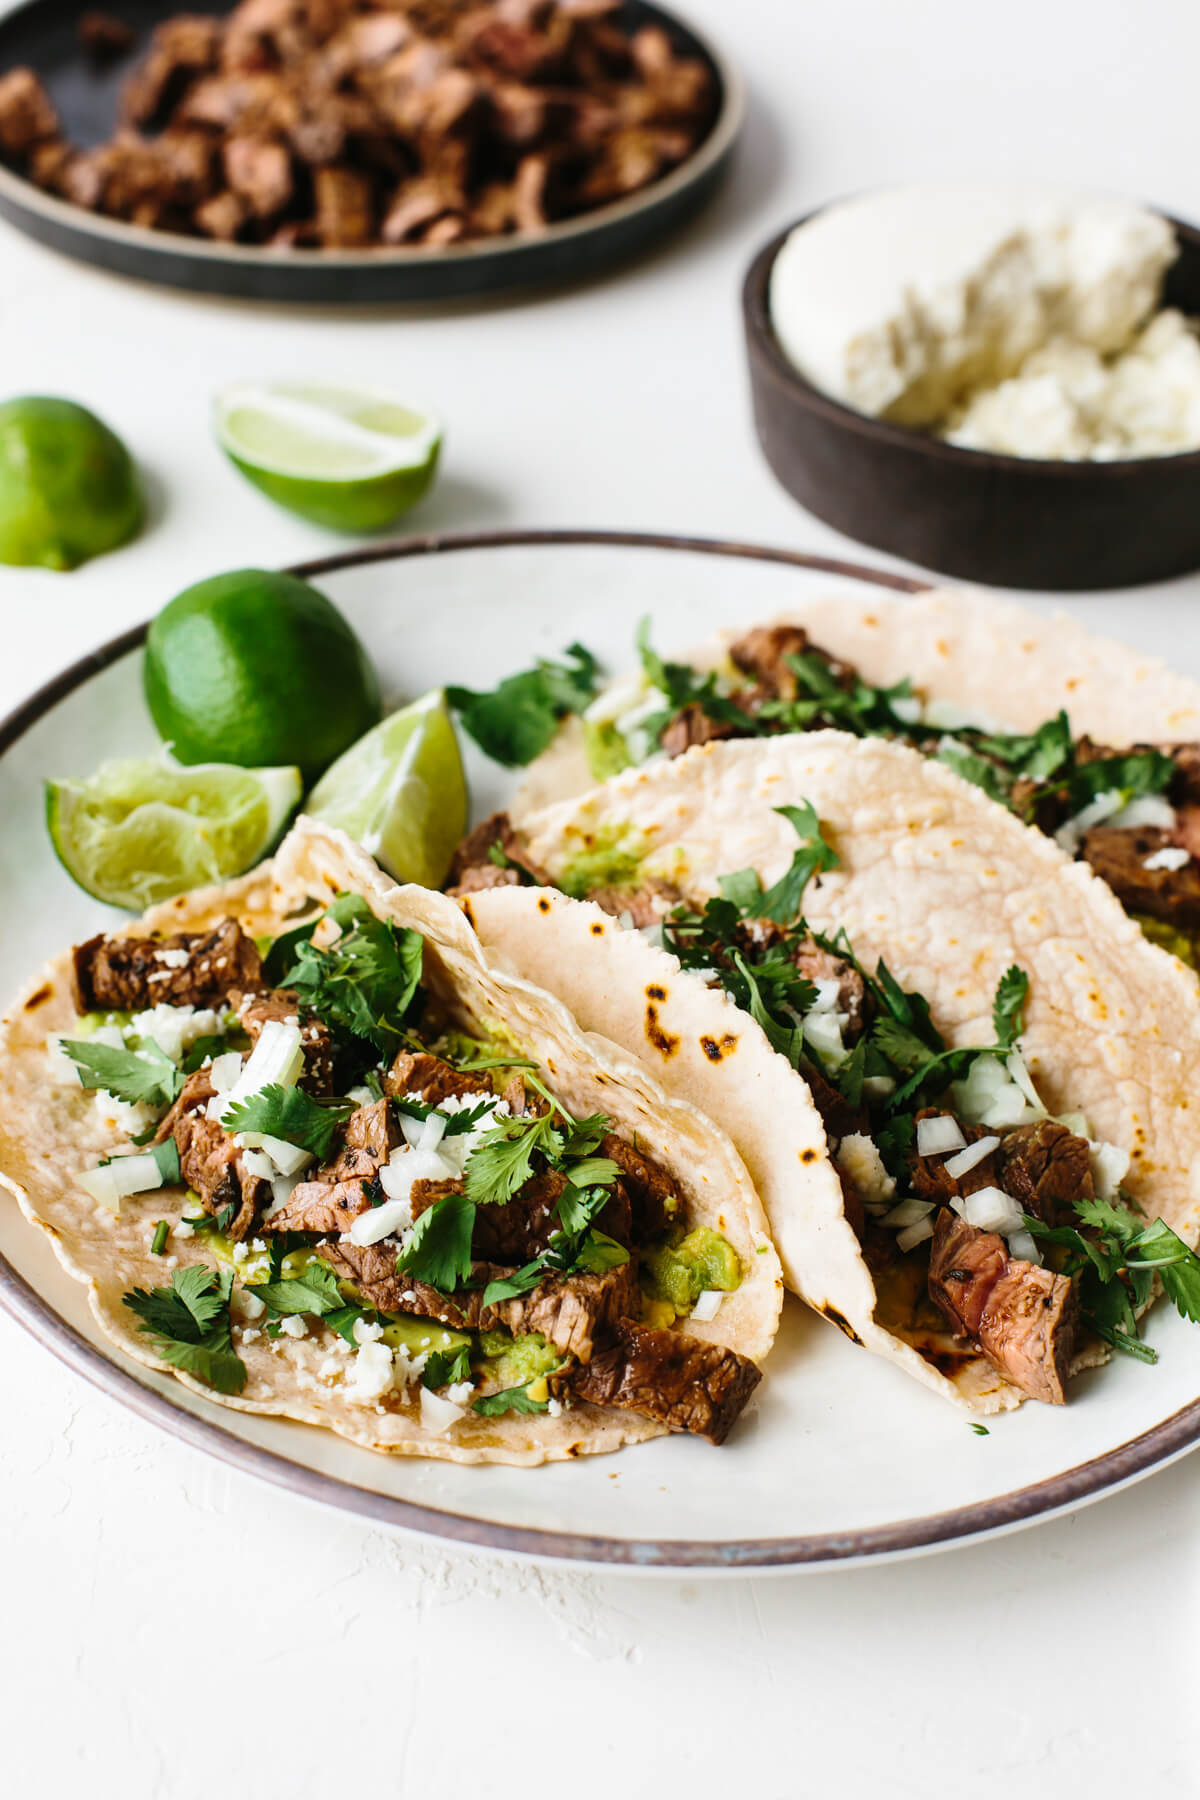 A plate with carne asada tacos next to limes.